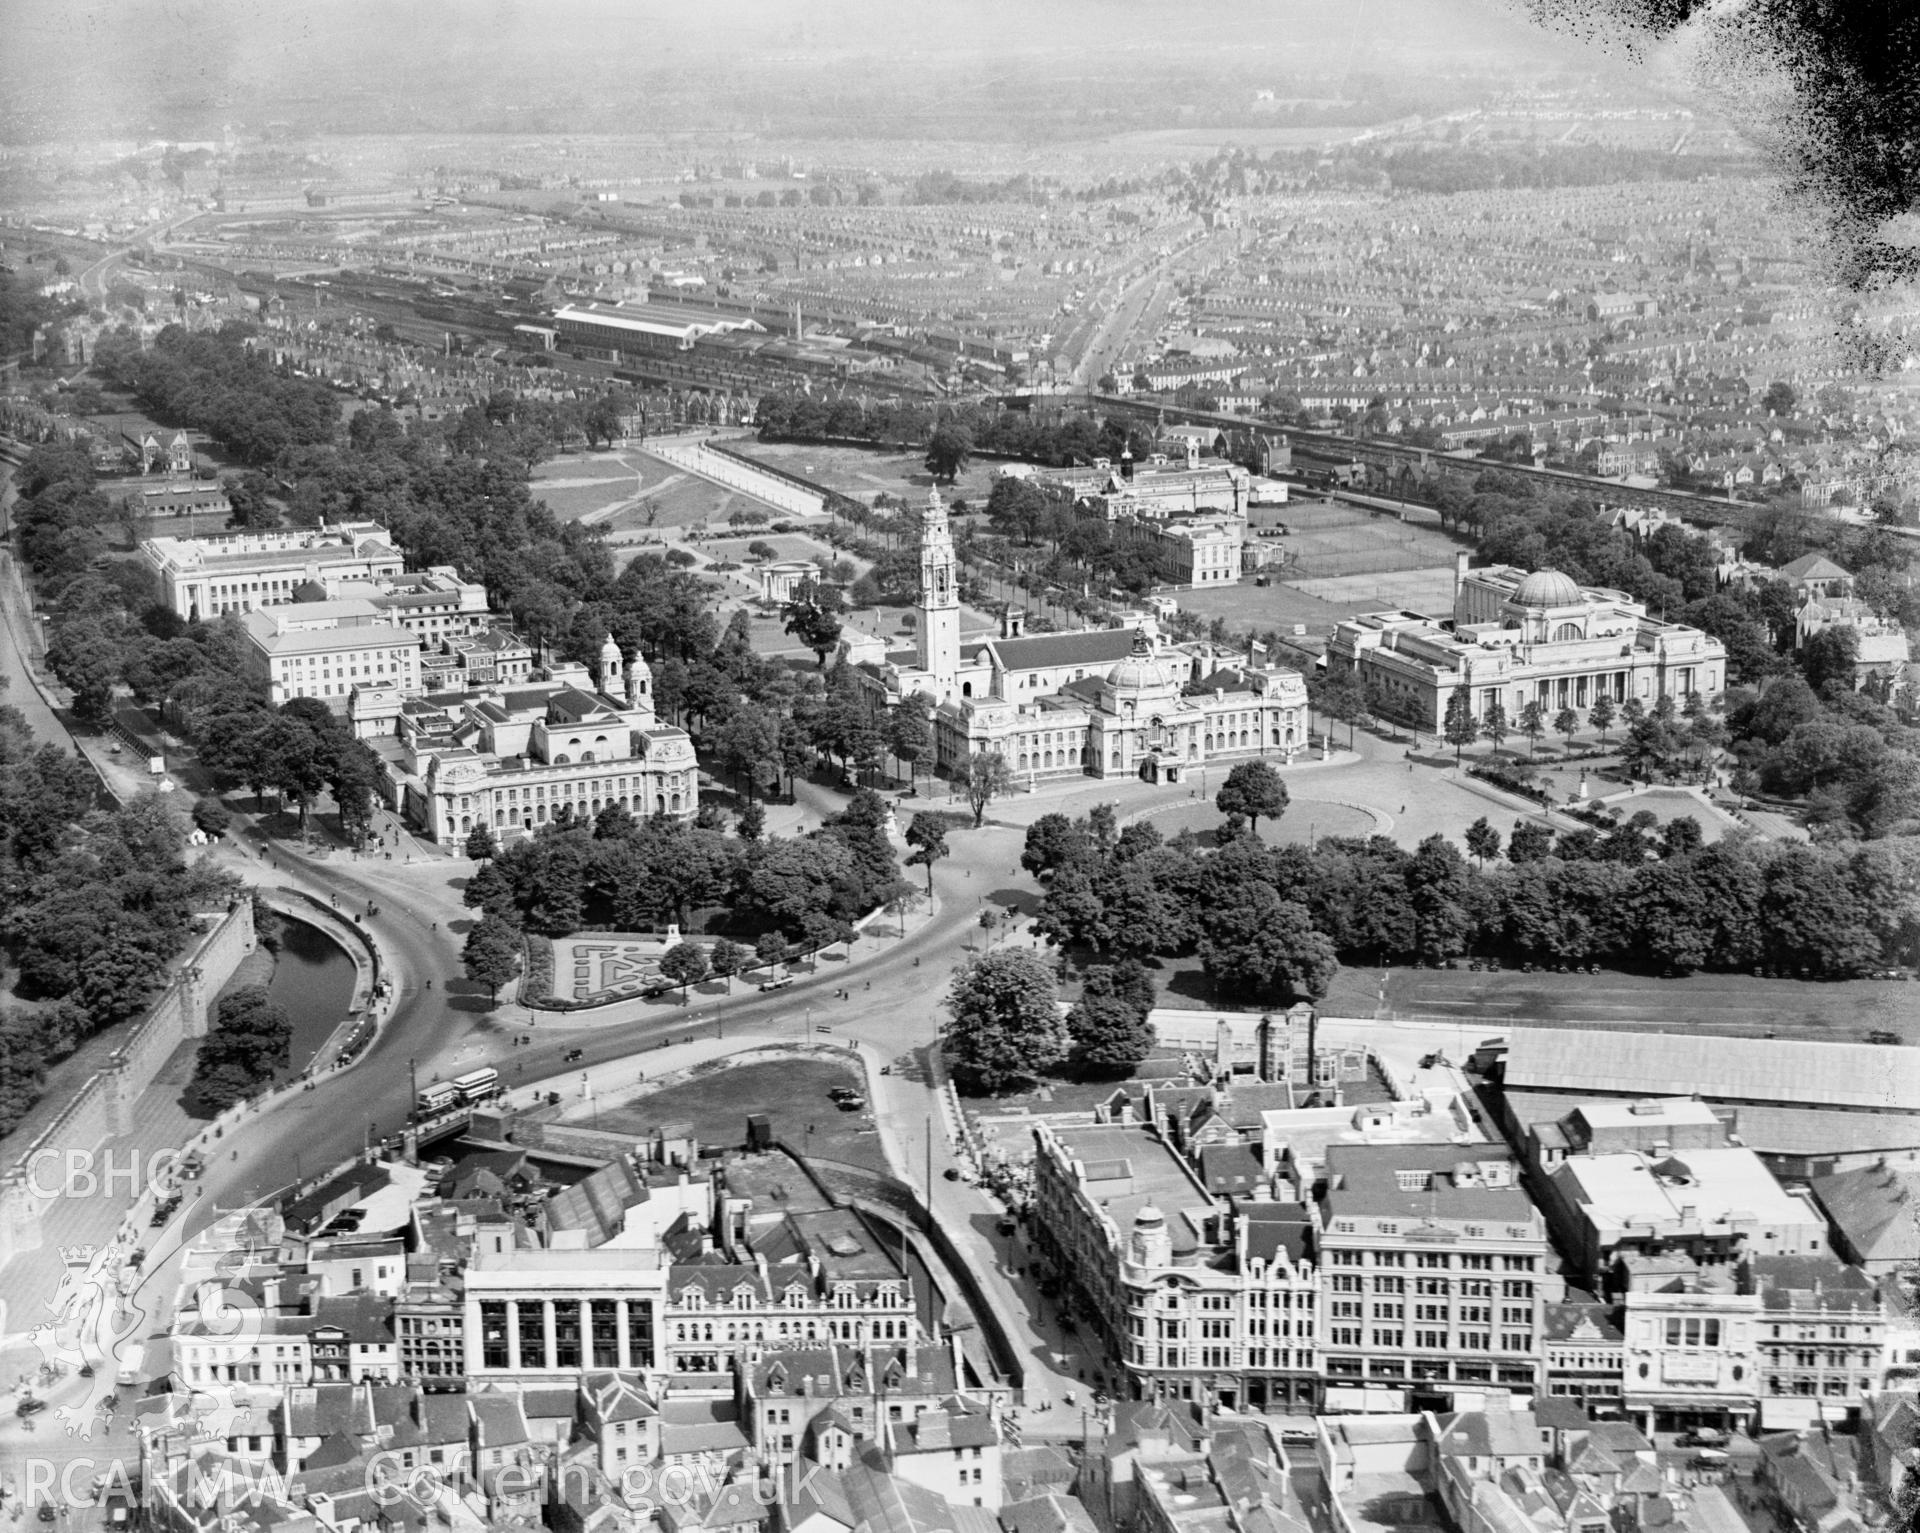 View of Cardiff Civic Centre, Cathays Park, oblique aerial view. 5?x4? black and white glass plate negative.